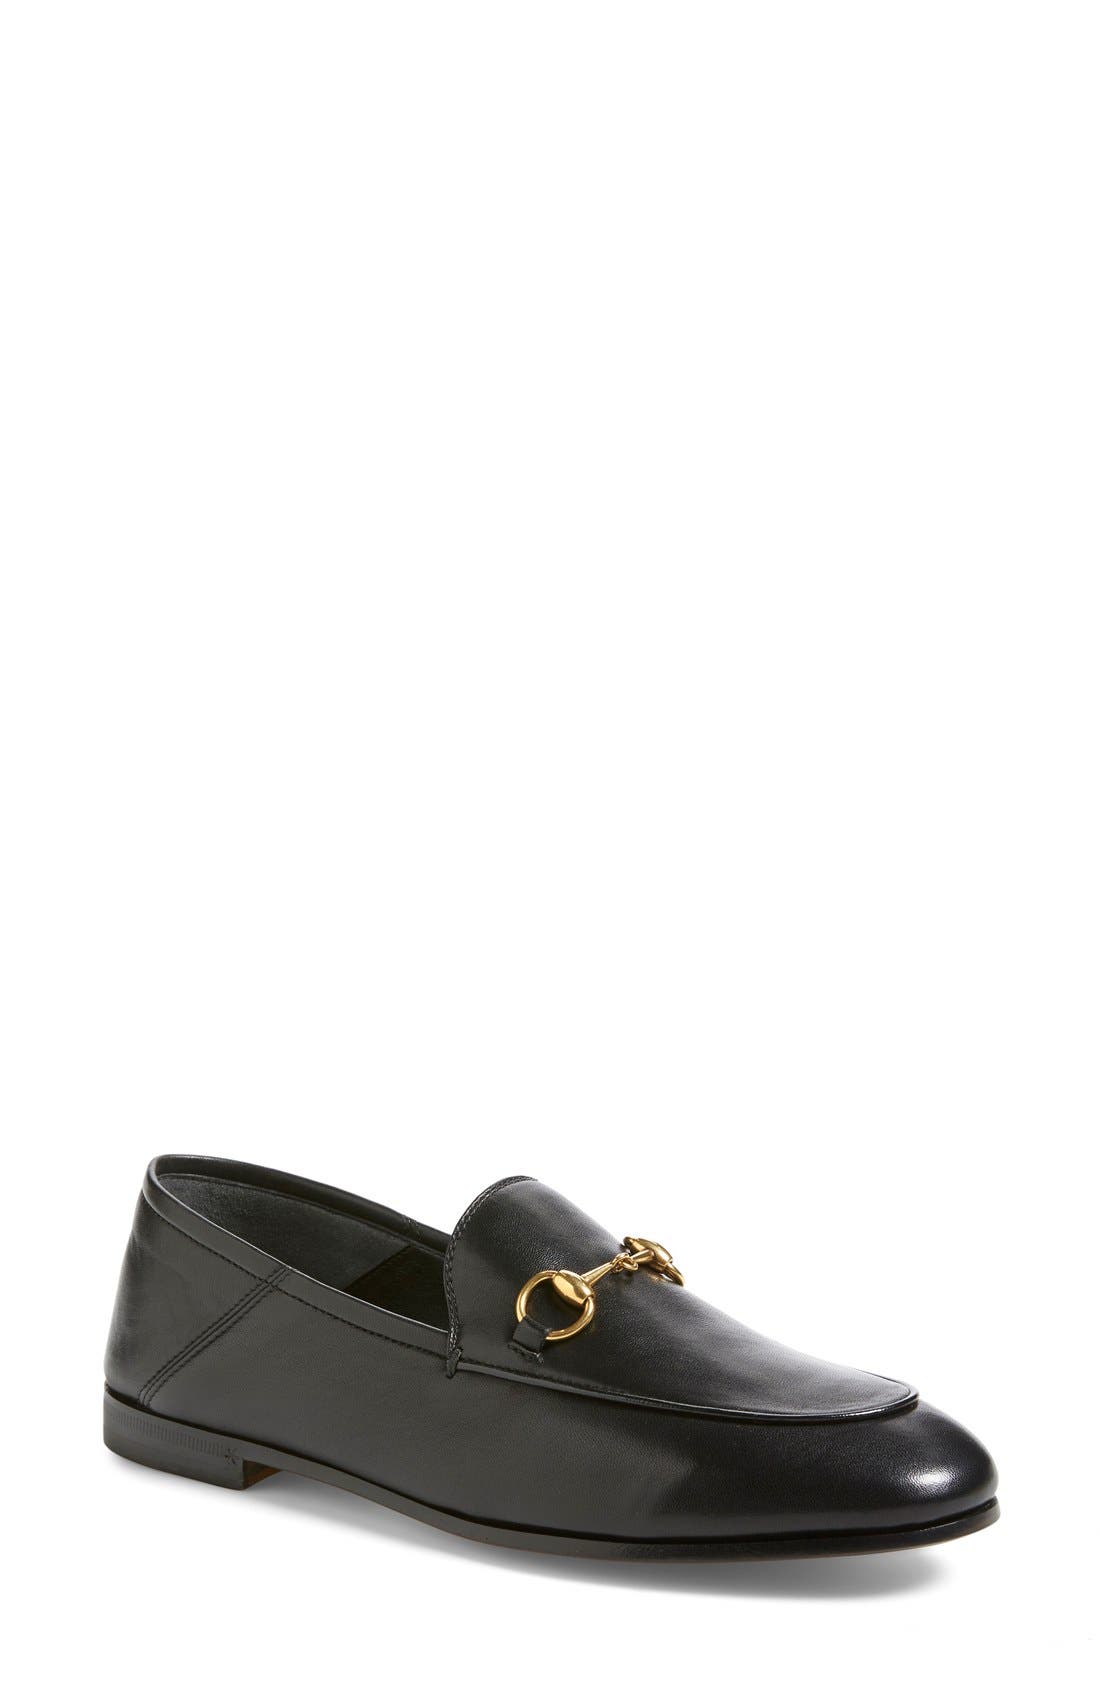 gucci brixton loafer womens